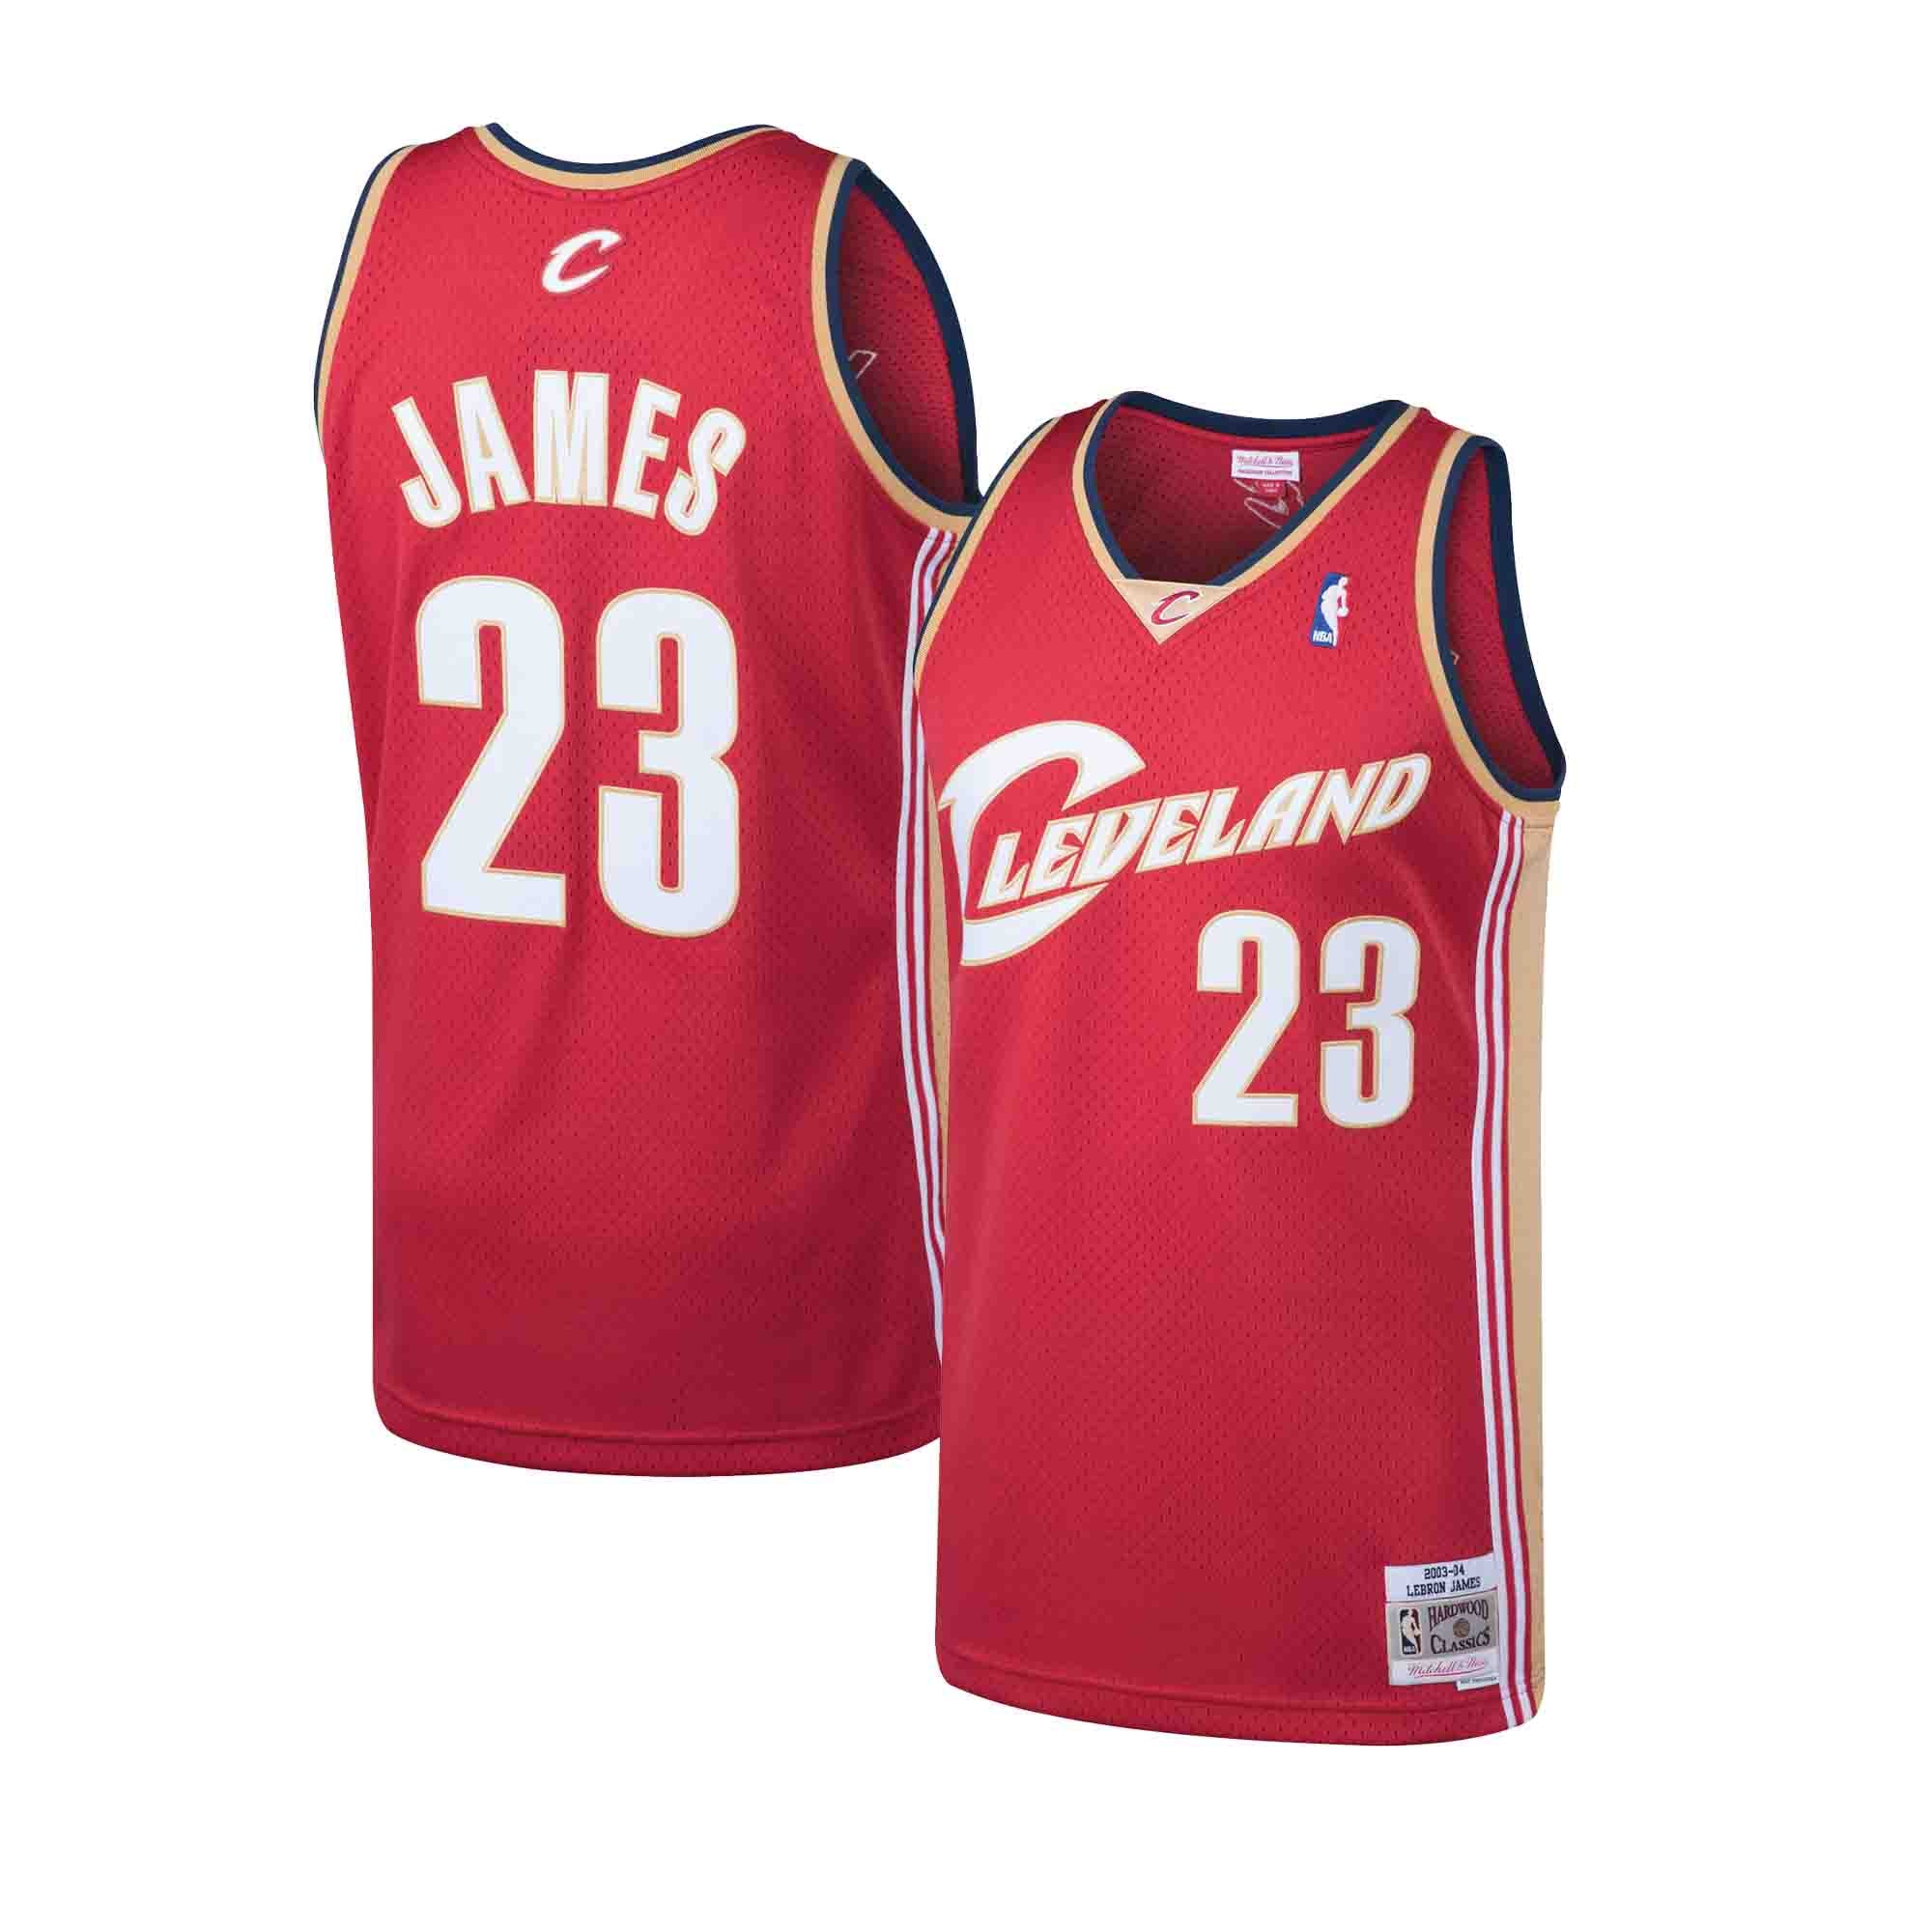 Women's Cleveland Cavaliers #23 LeBron James 2018 All-Star Jersey